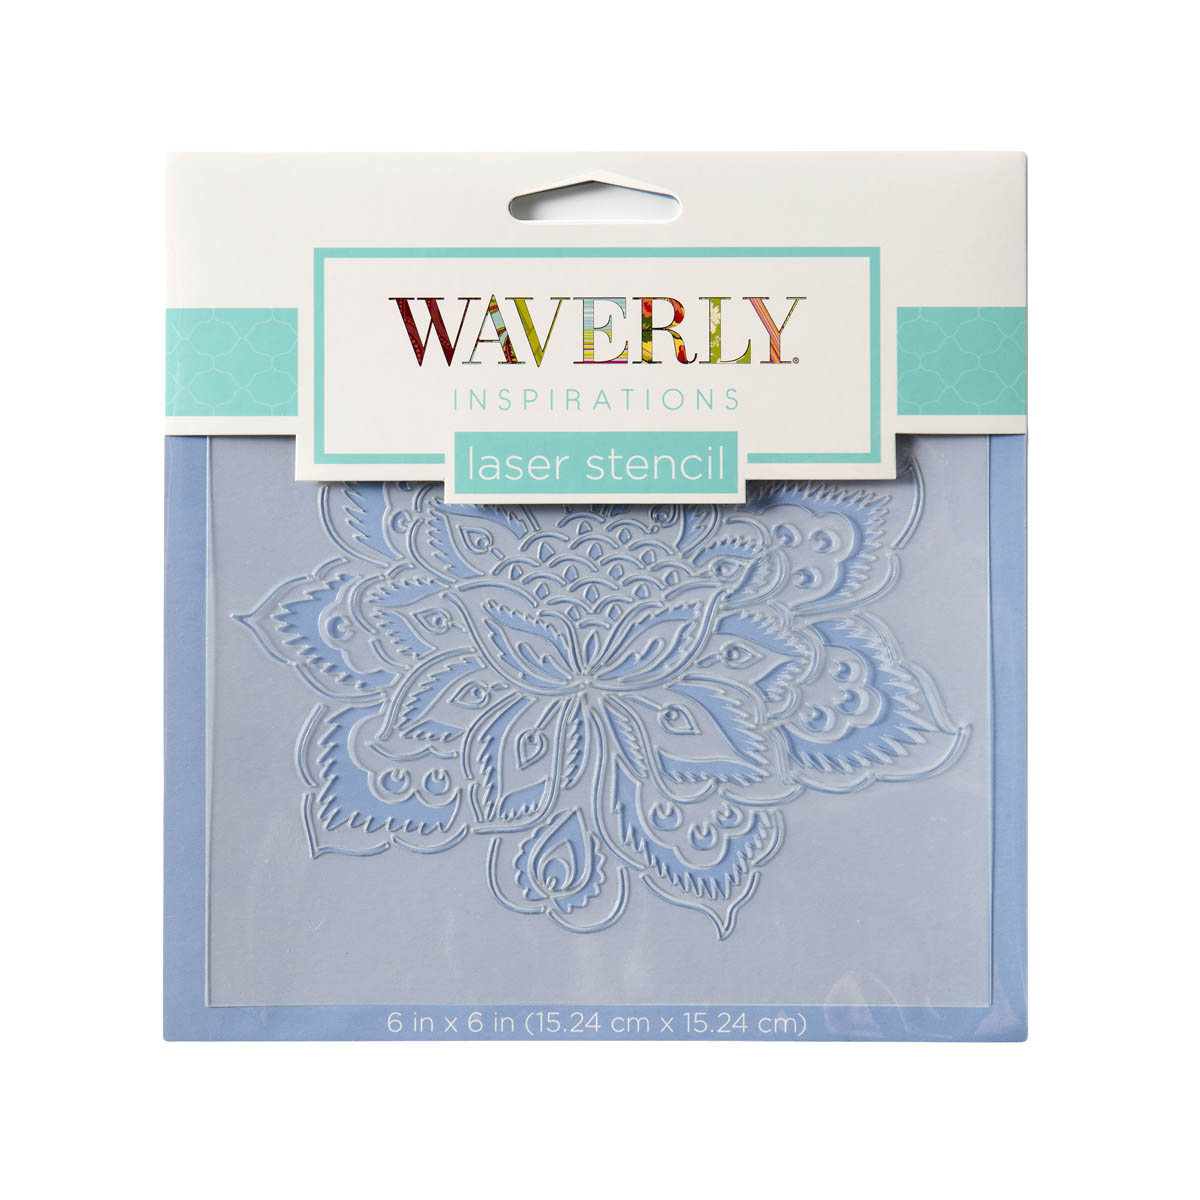 Waverly ® Inspirations Laser Stencils - Accent - Floral Ornate, 6